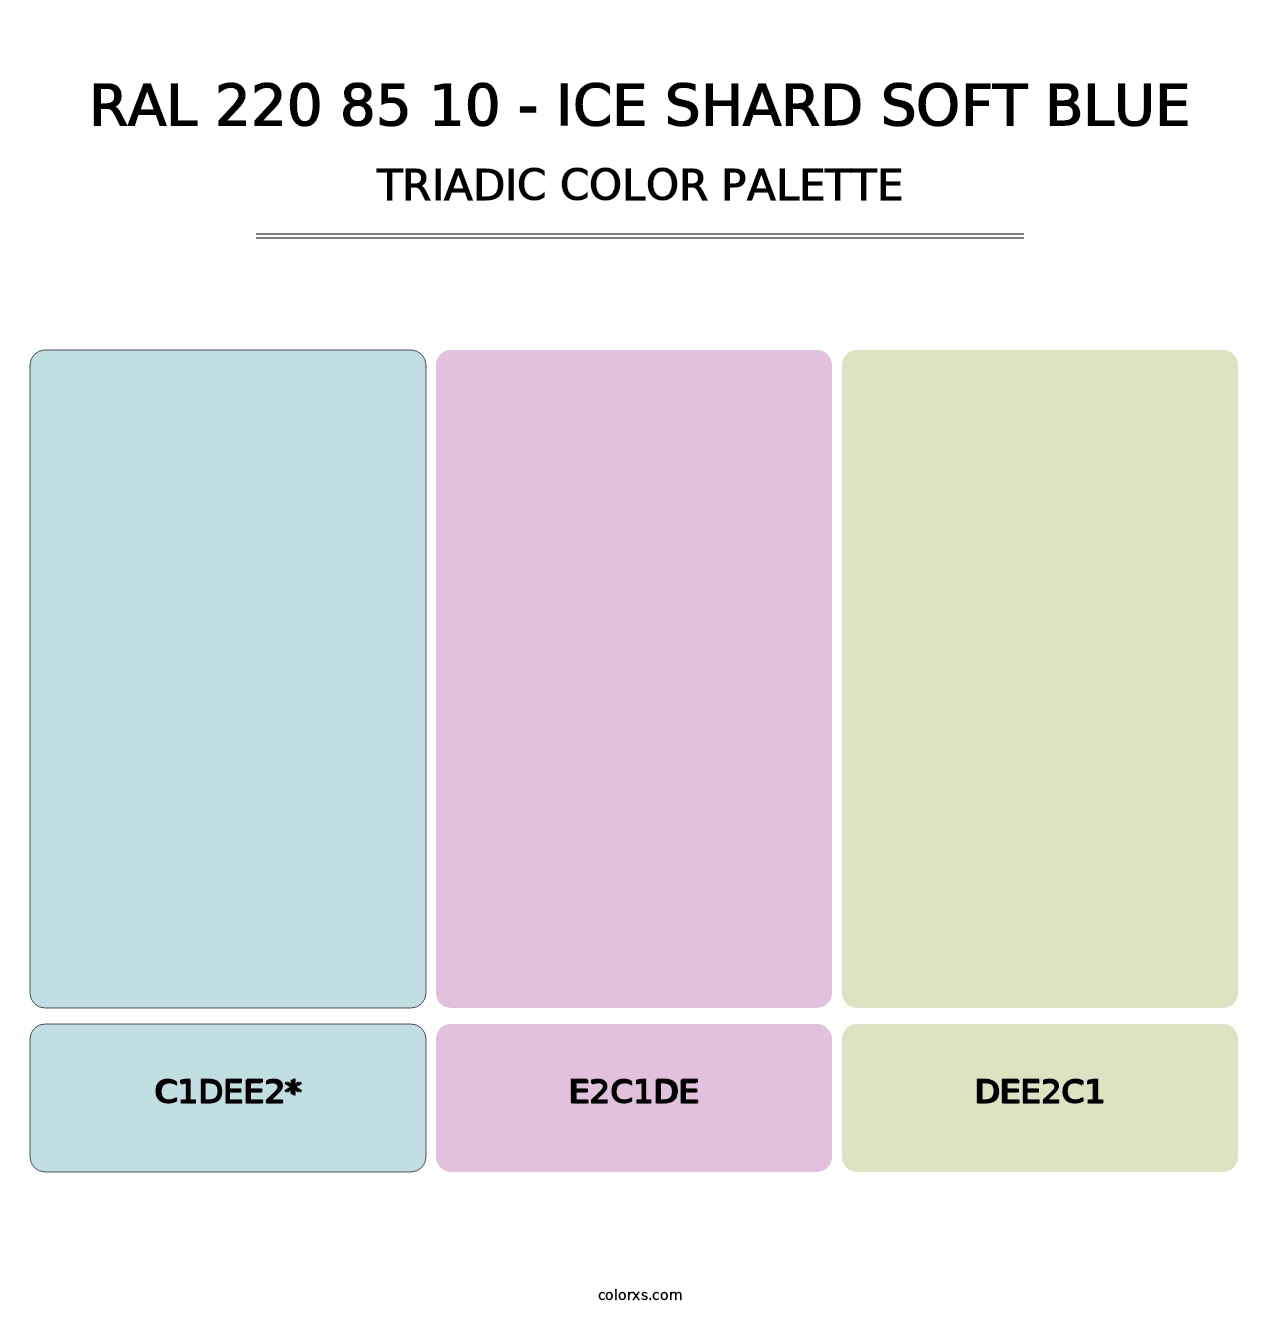 RAL 220 85 10 - Ice Shard Soft Blue - Triadic Color Palette